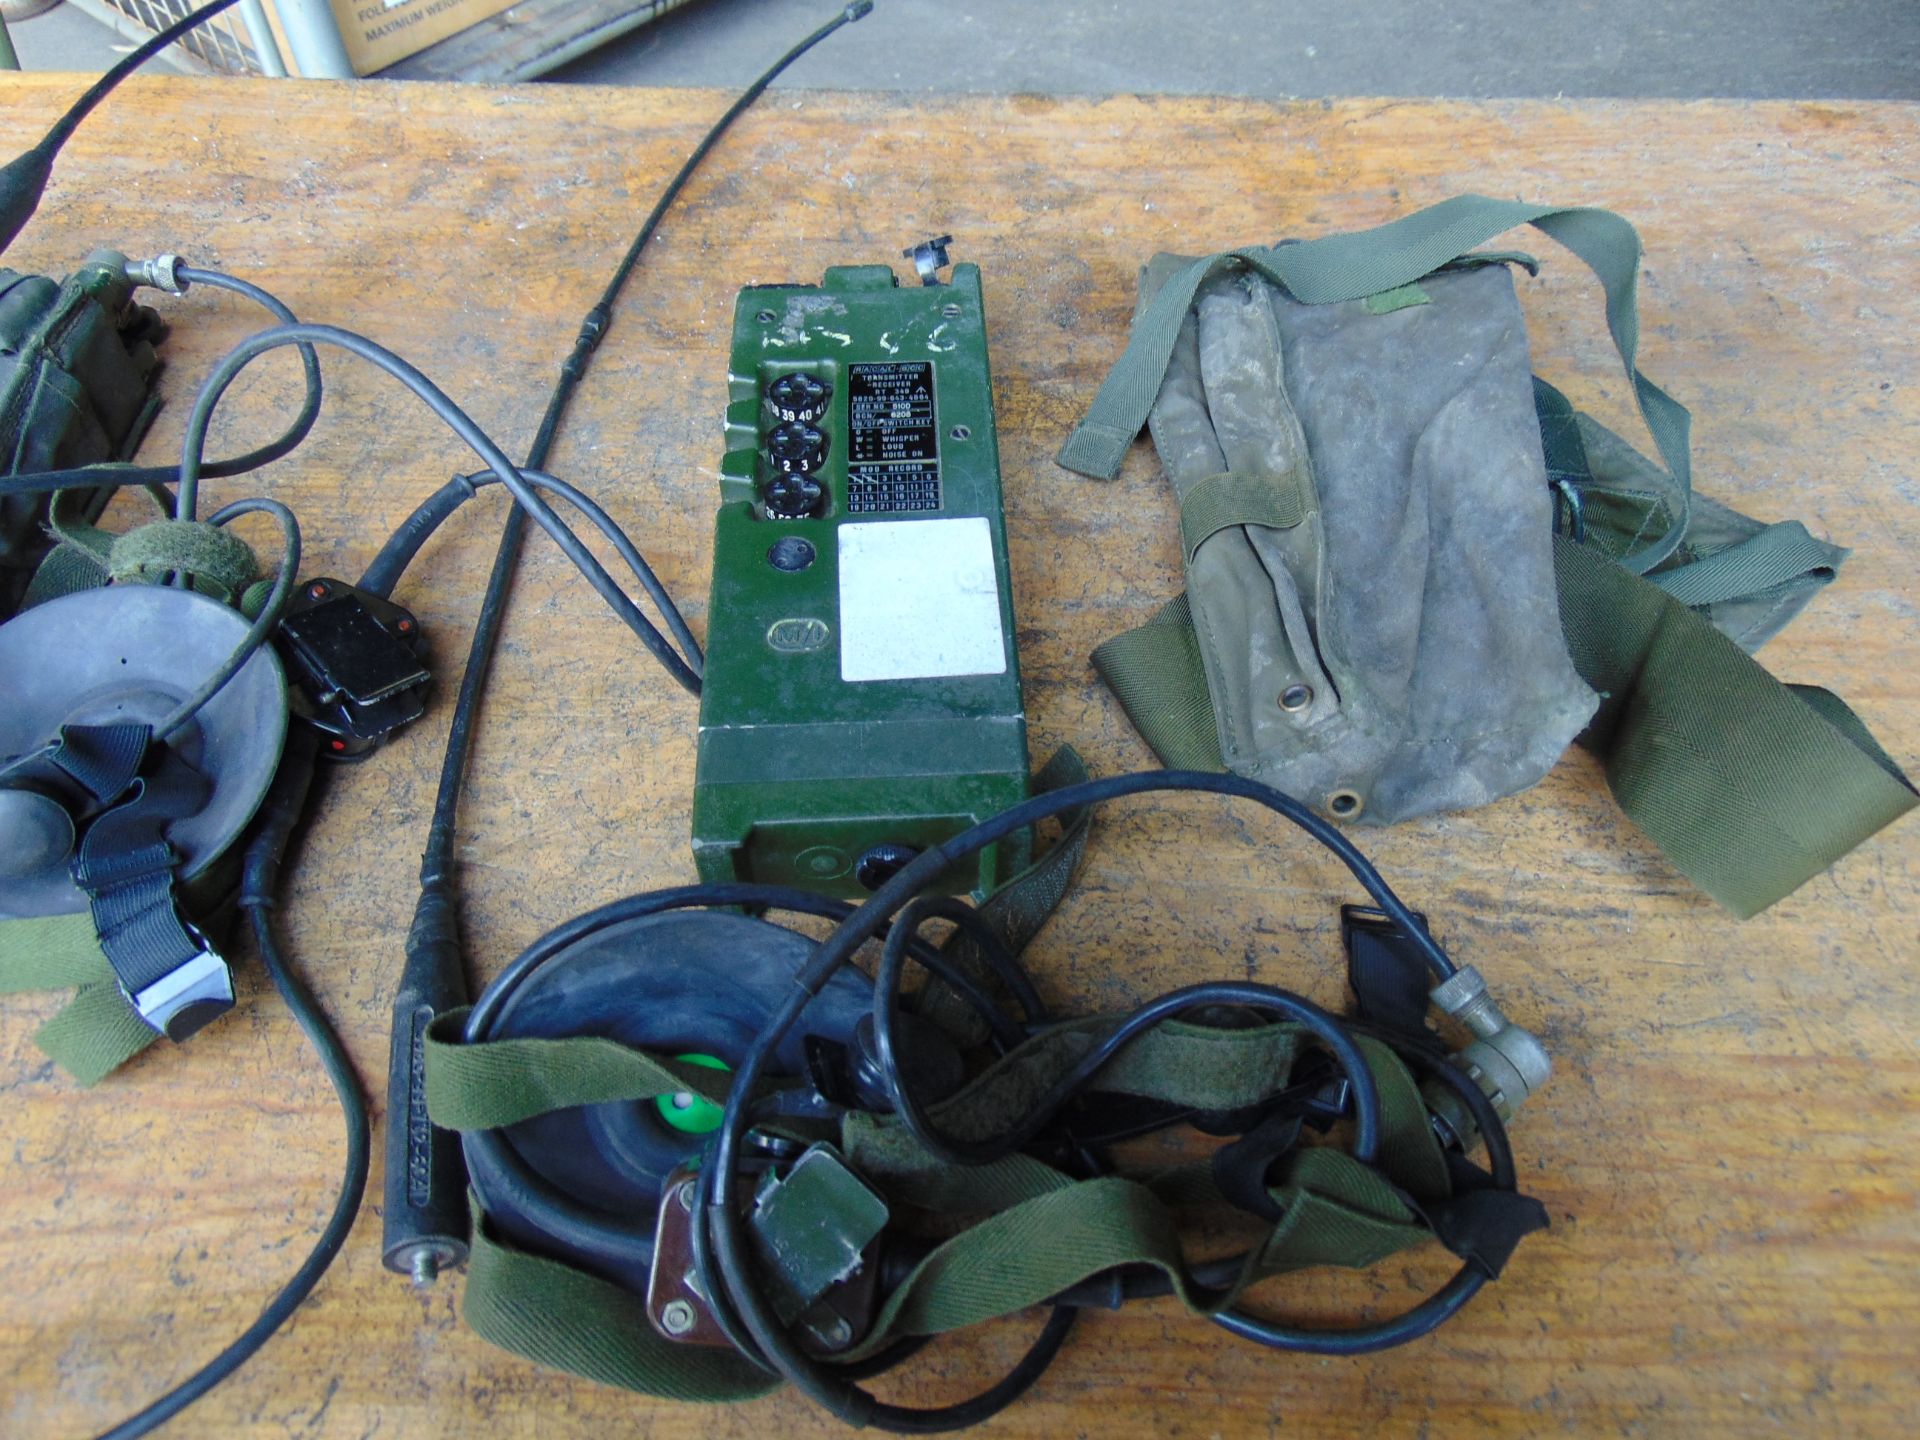 2 x RT 349 British Army Transmitter / Receiver c/w Pouch, Headset, Antenna and Battery Cassette. - Image 5 of 5